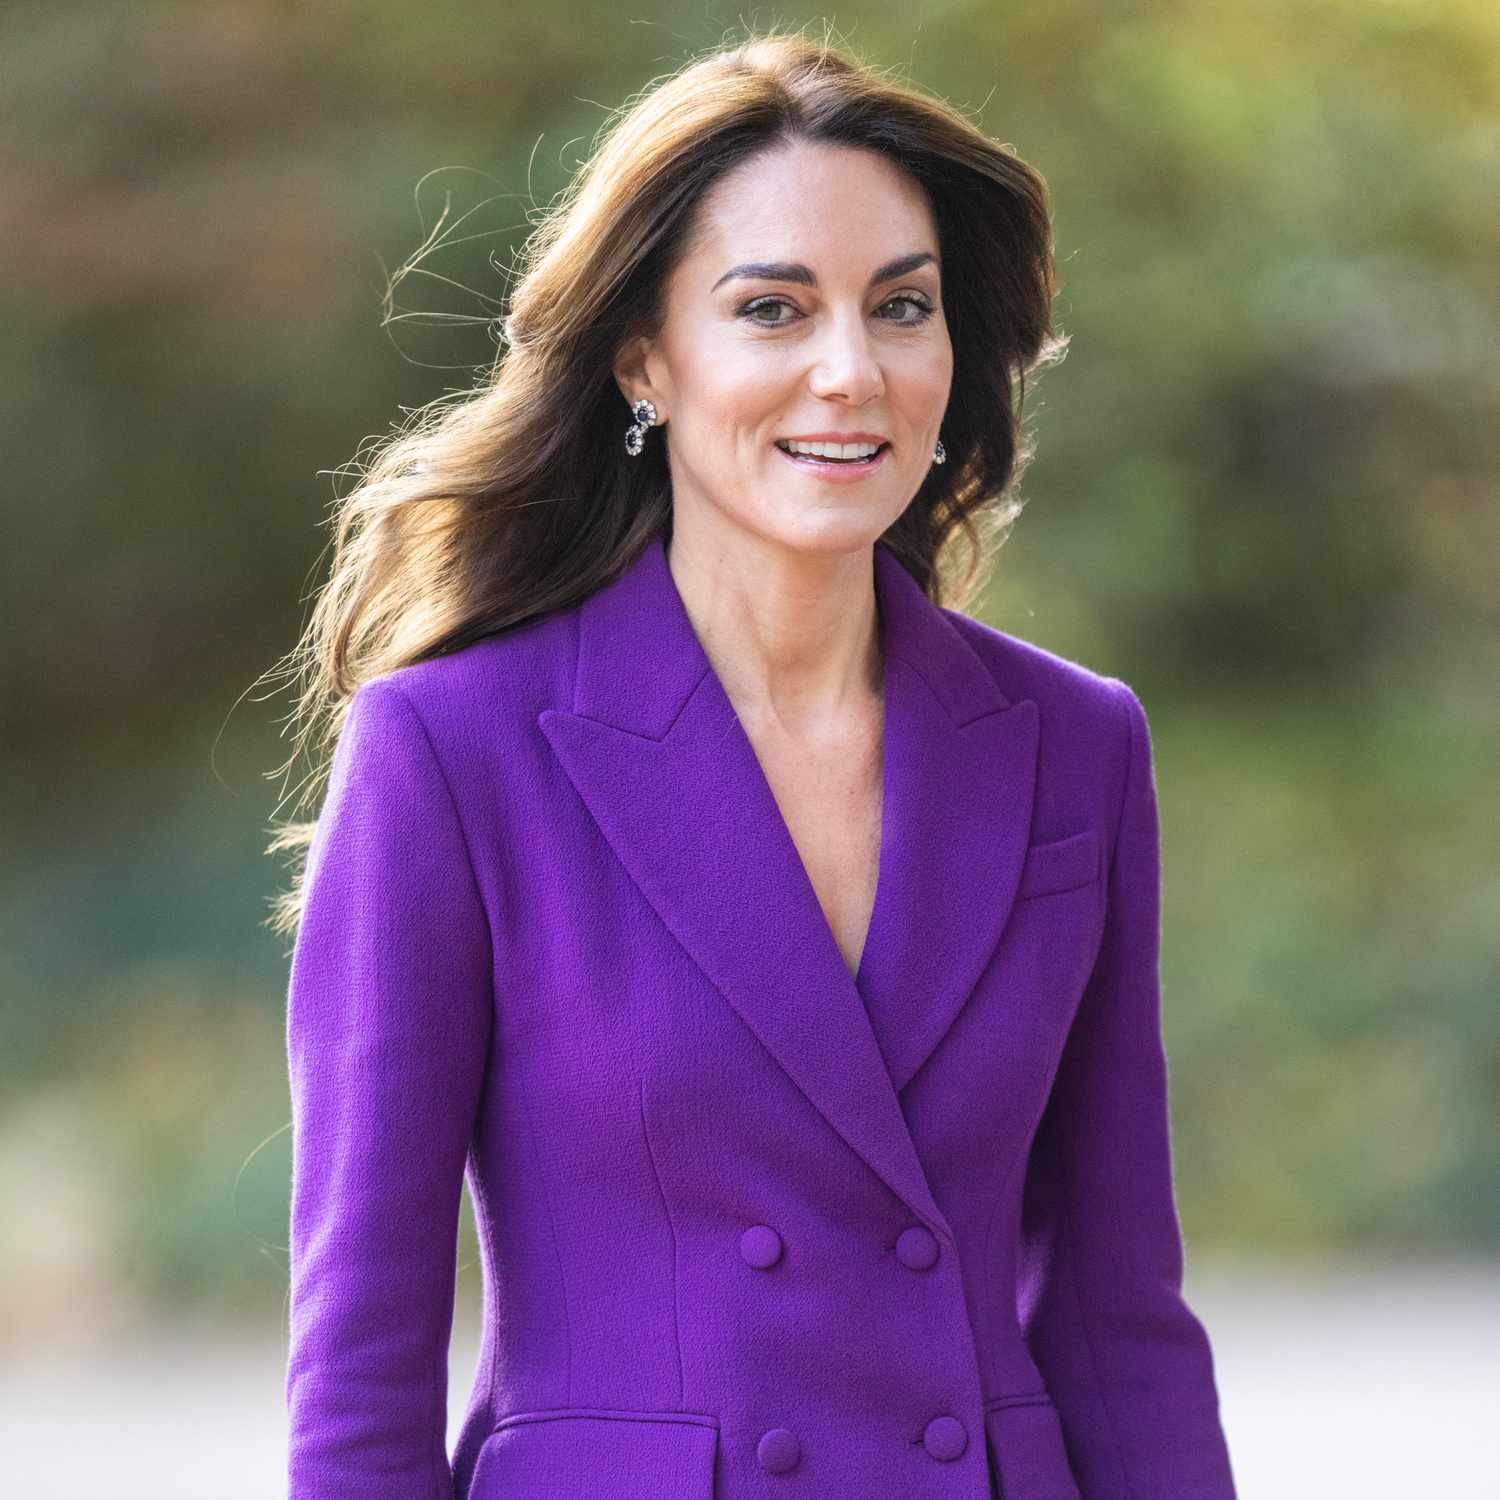 Kate Middleton smiling in a purple suit with her hair blowing in the wind